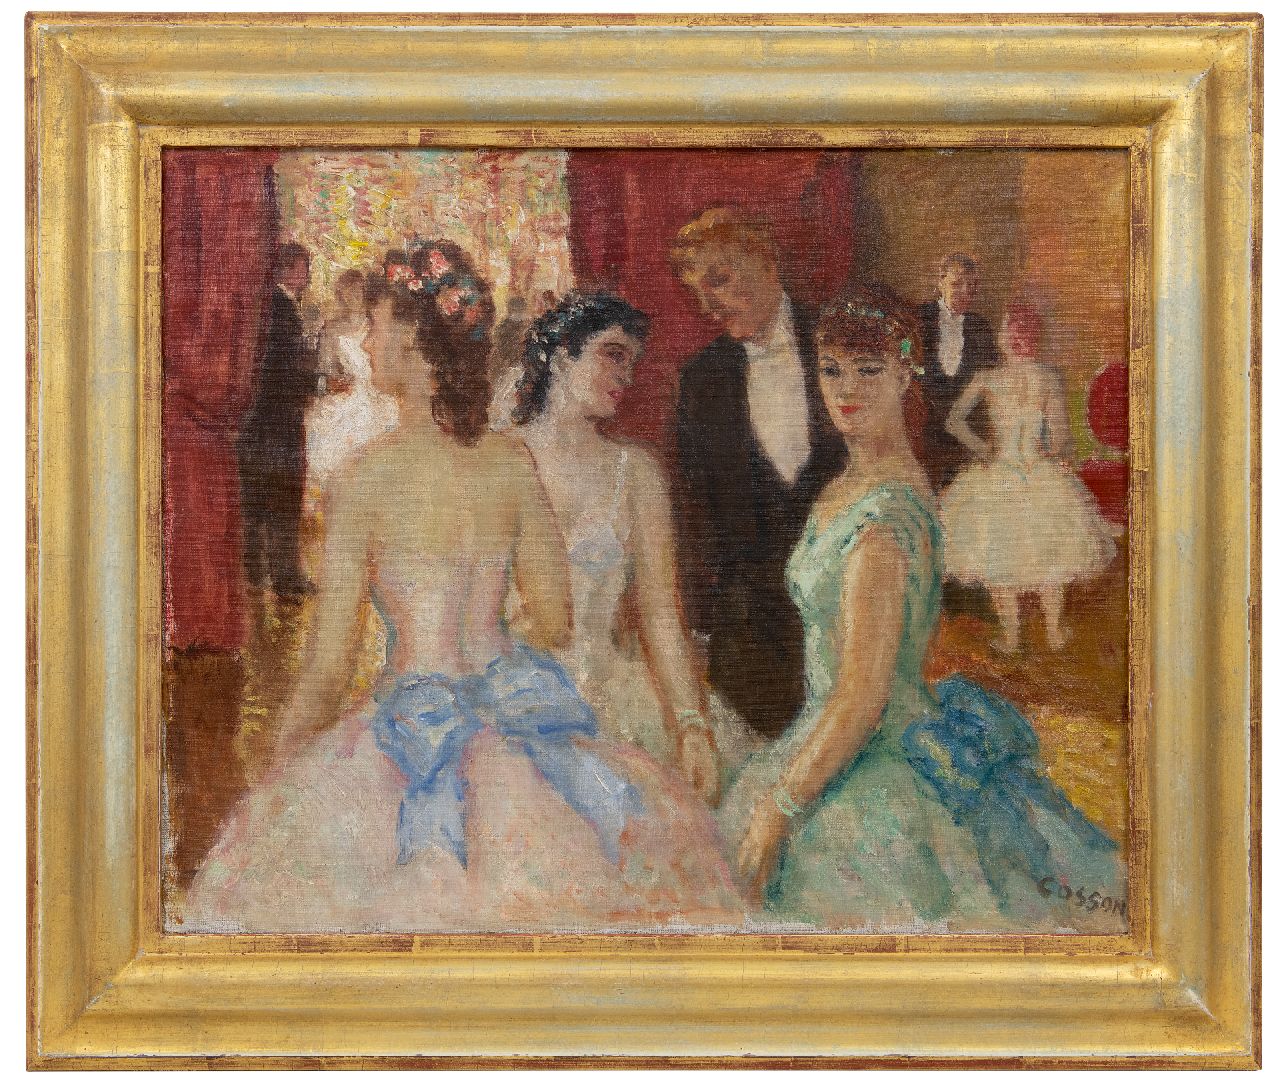 Cosson J.L.M.  | Jean Louis 'Marcel' Cosson | Paintings offered for sale | After the ballet performance, oil on canvas 50.2 x 61.0 cm, signed l.r.